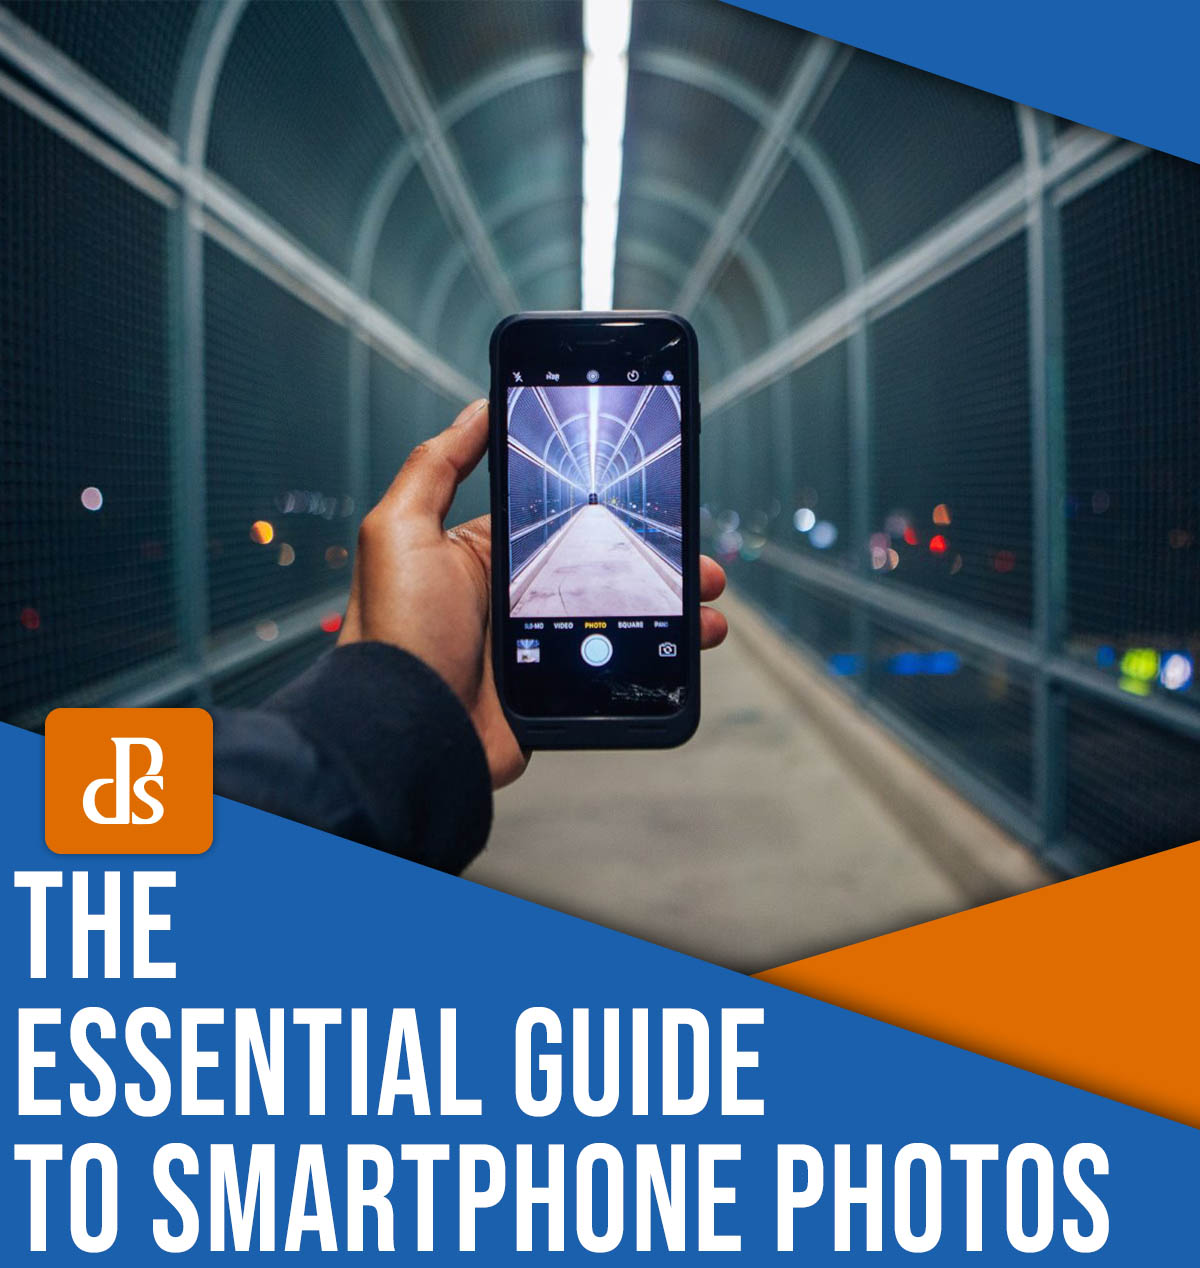 The essential guide to smartphone photos